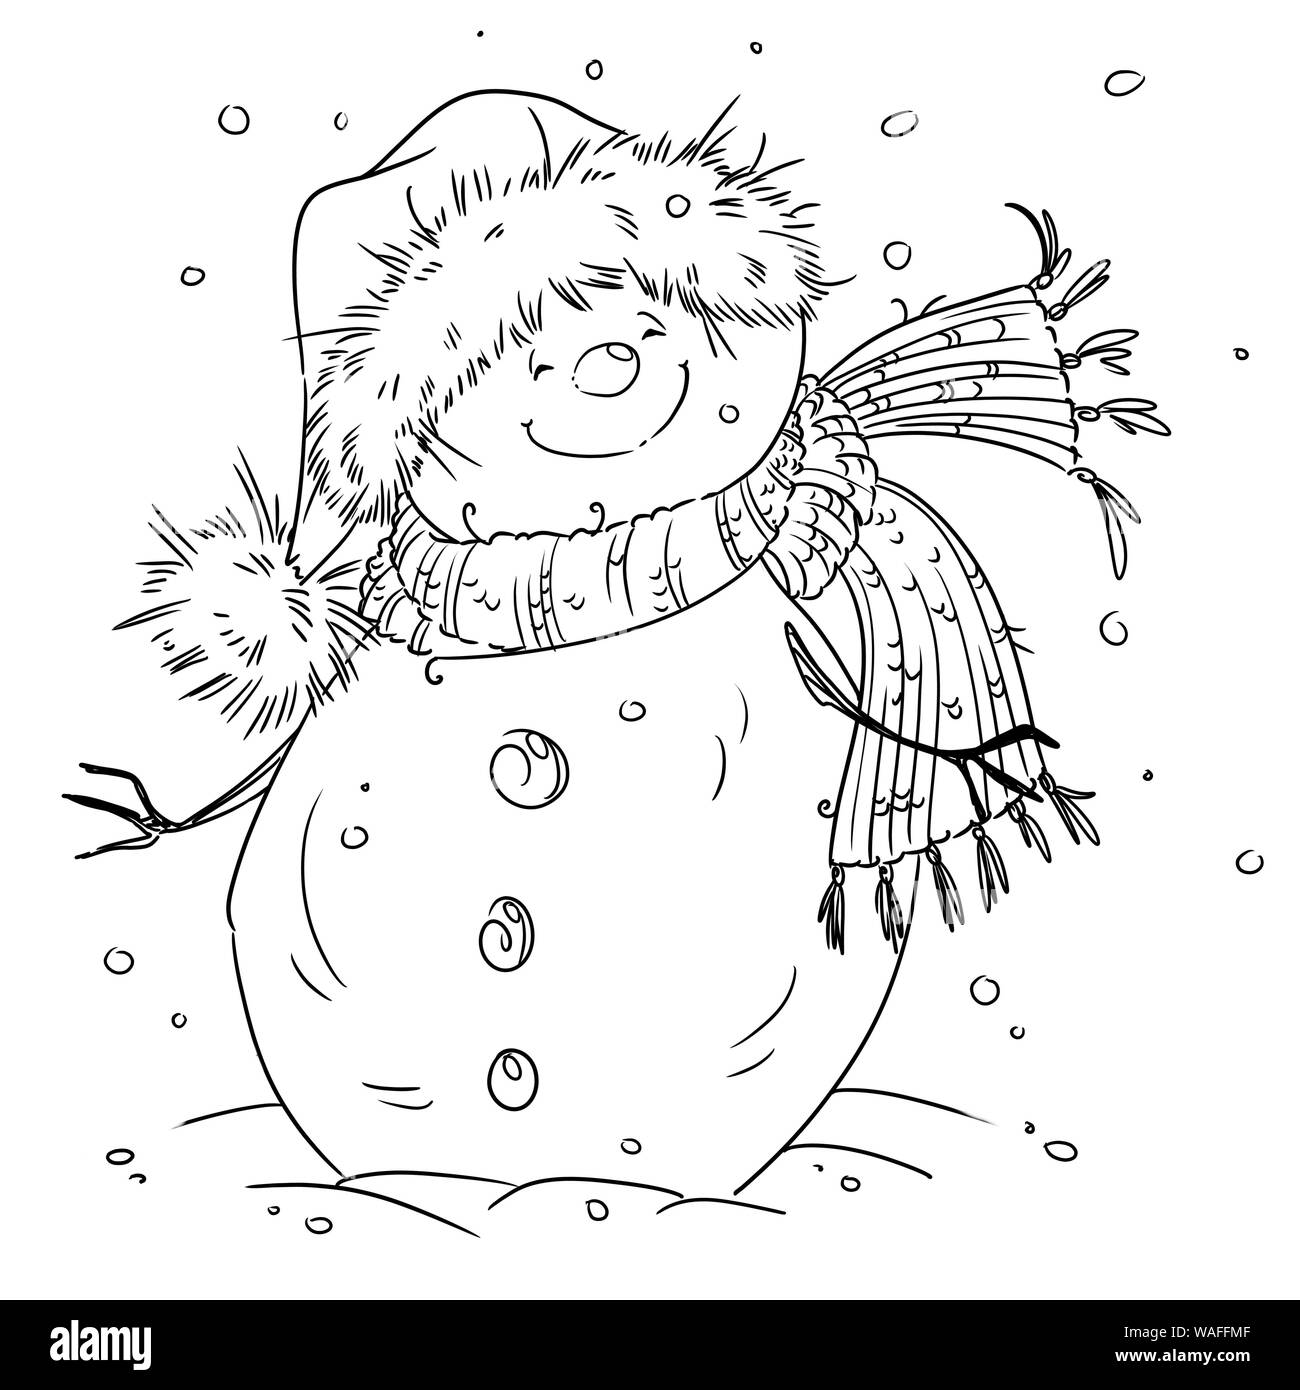 Outlined happy smiling snowman. Cute illustration coloring page. Digital stamp. Stock Photo